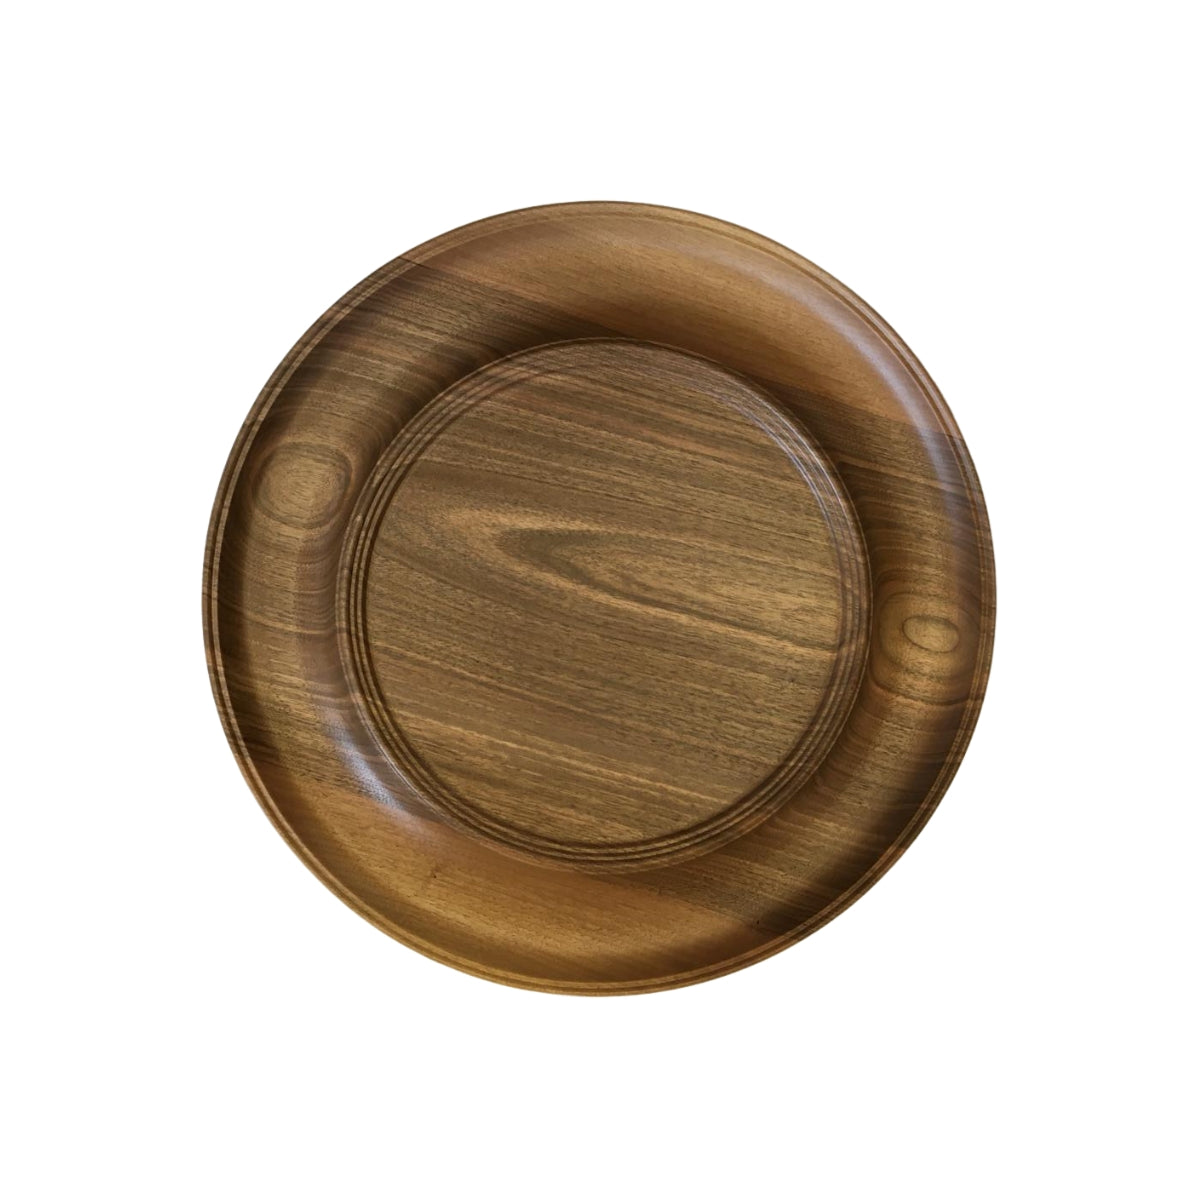 Mader Wooden Rondell for Spinning Tops 